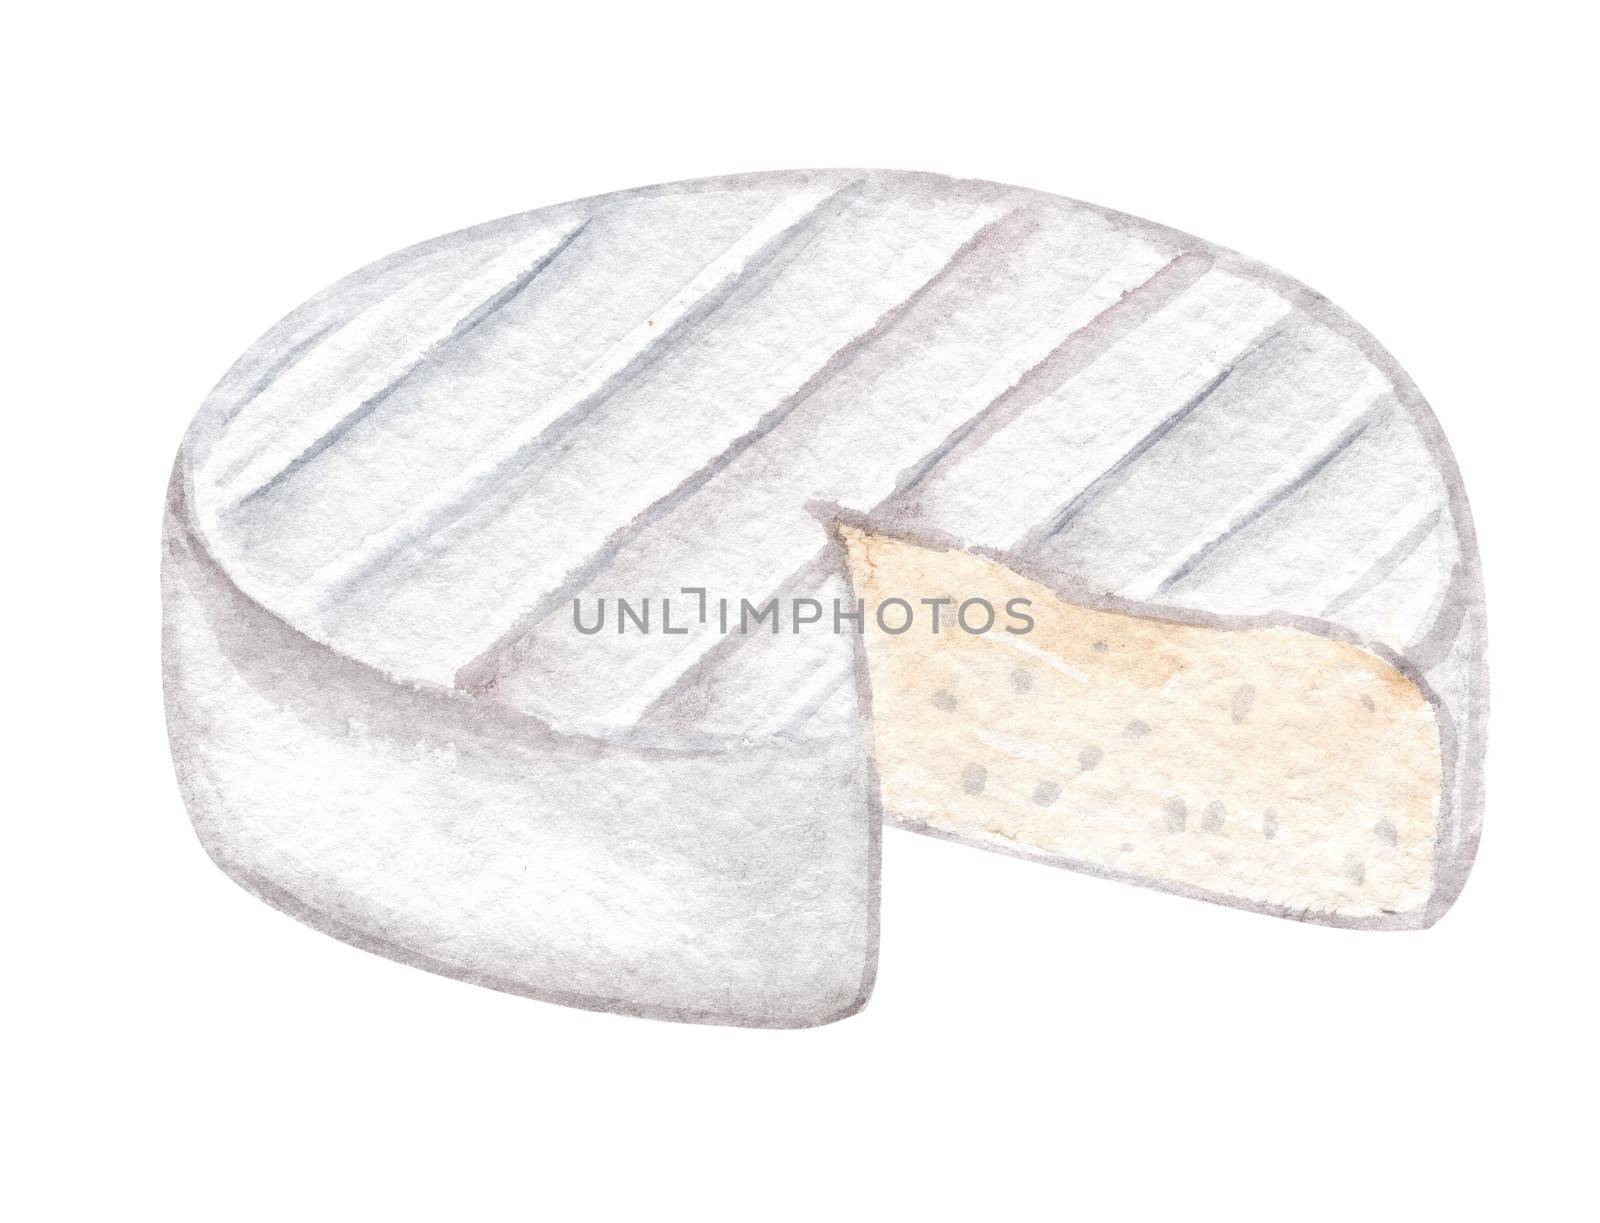 Watercolor white cheese with mold isolated on white background. Camembert wheel hand drawn illustration. Brie art